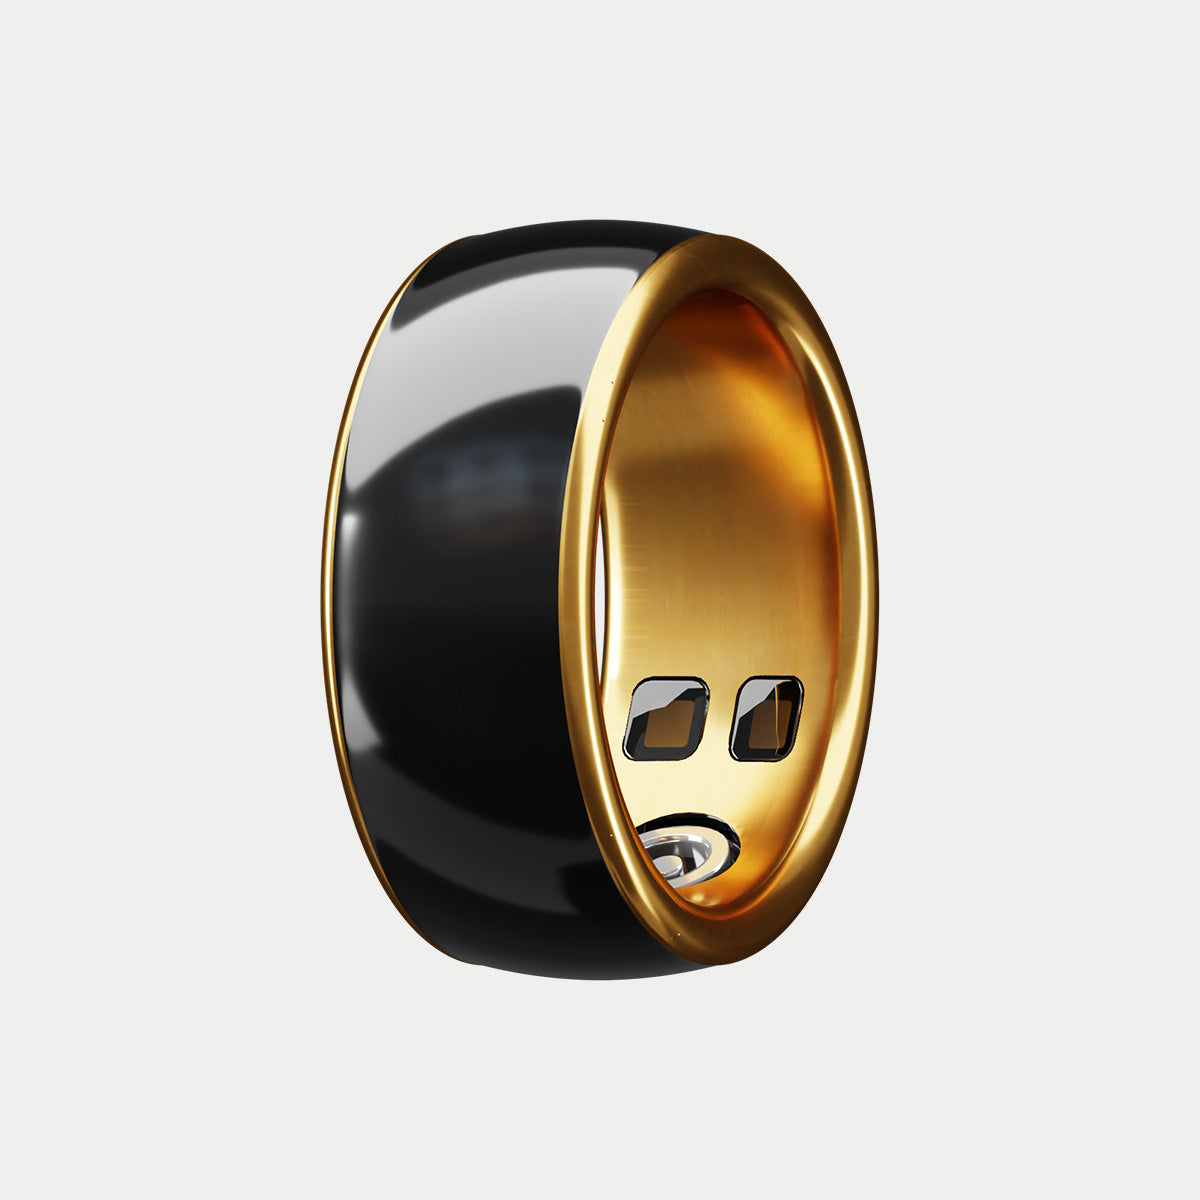 Yeyro Ring - Smart Ring for Health and Fitness Monitoring